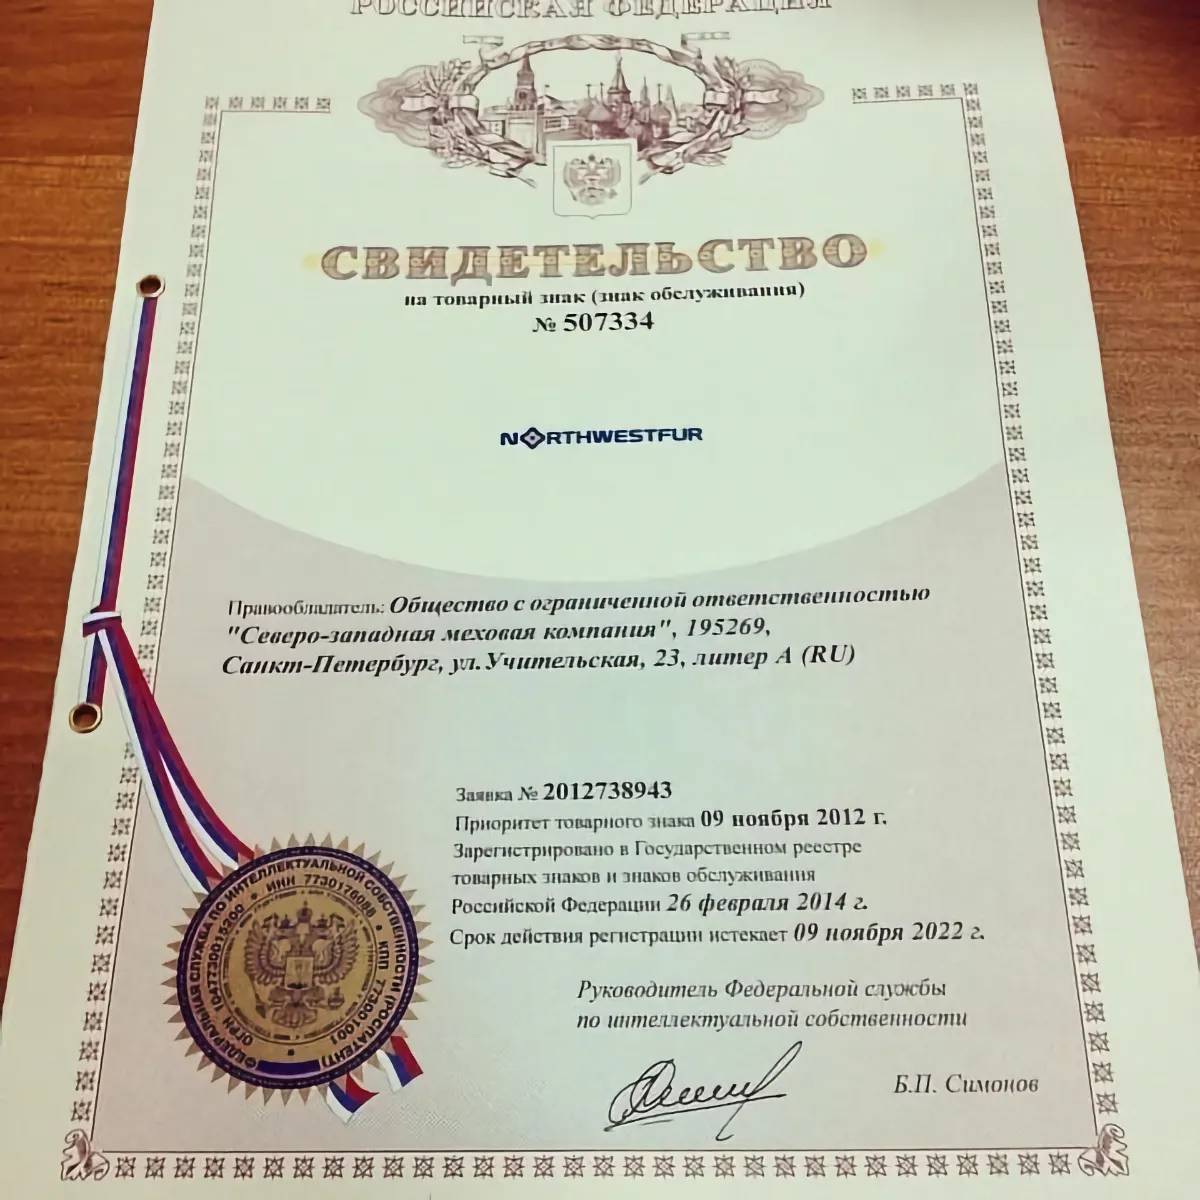 Our company has obtained the Northwestfur trademark registration certificate